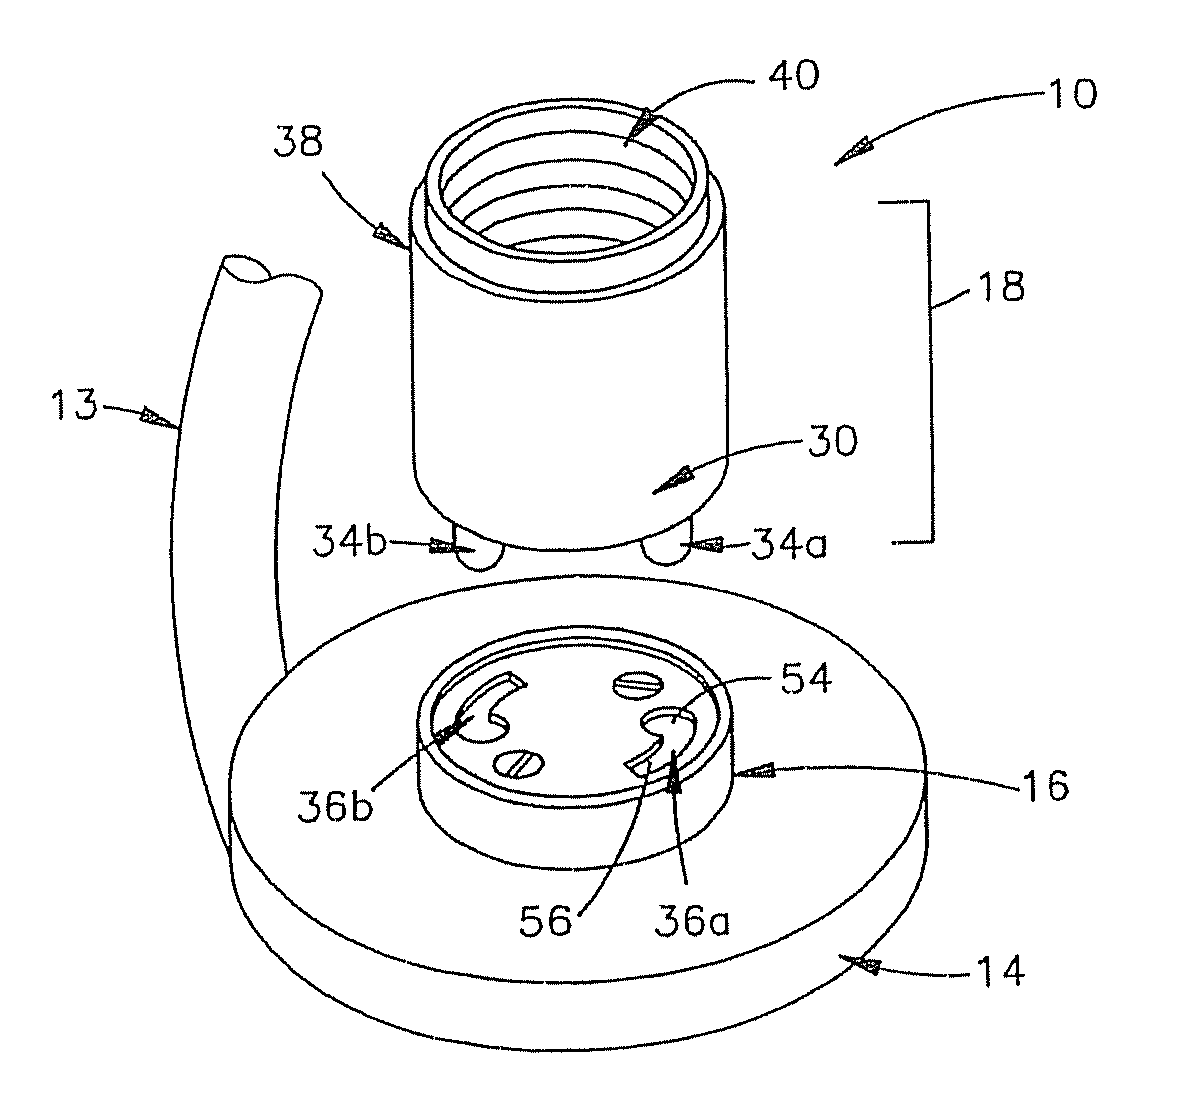 Incandescent and LED light bulbs and methods and devices for converting between incandescent lighting products and low-power lighting products